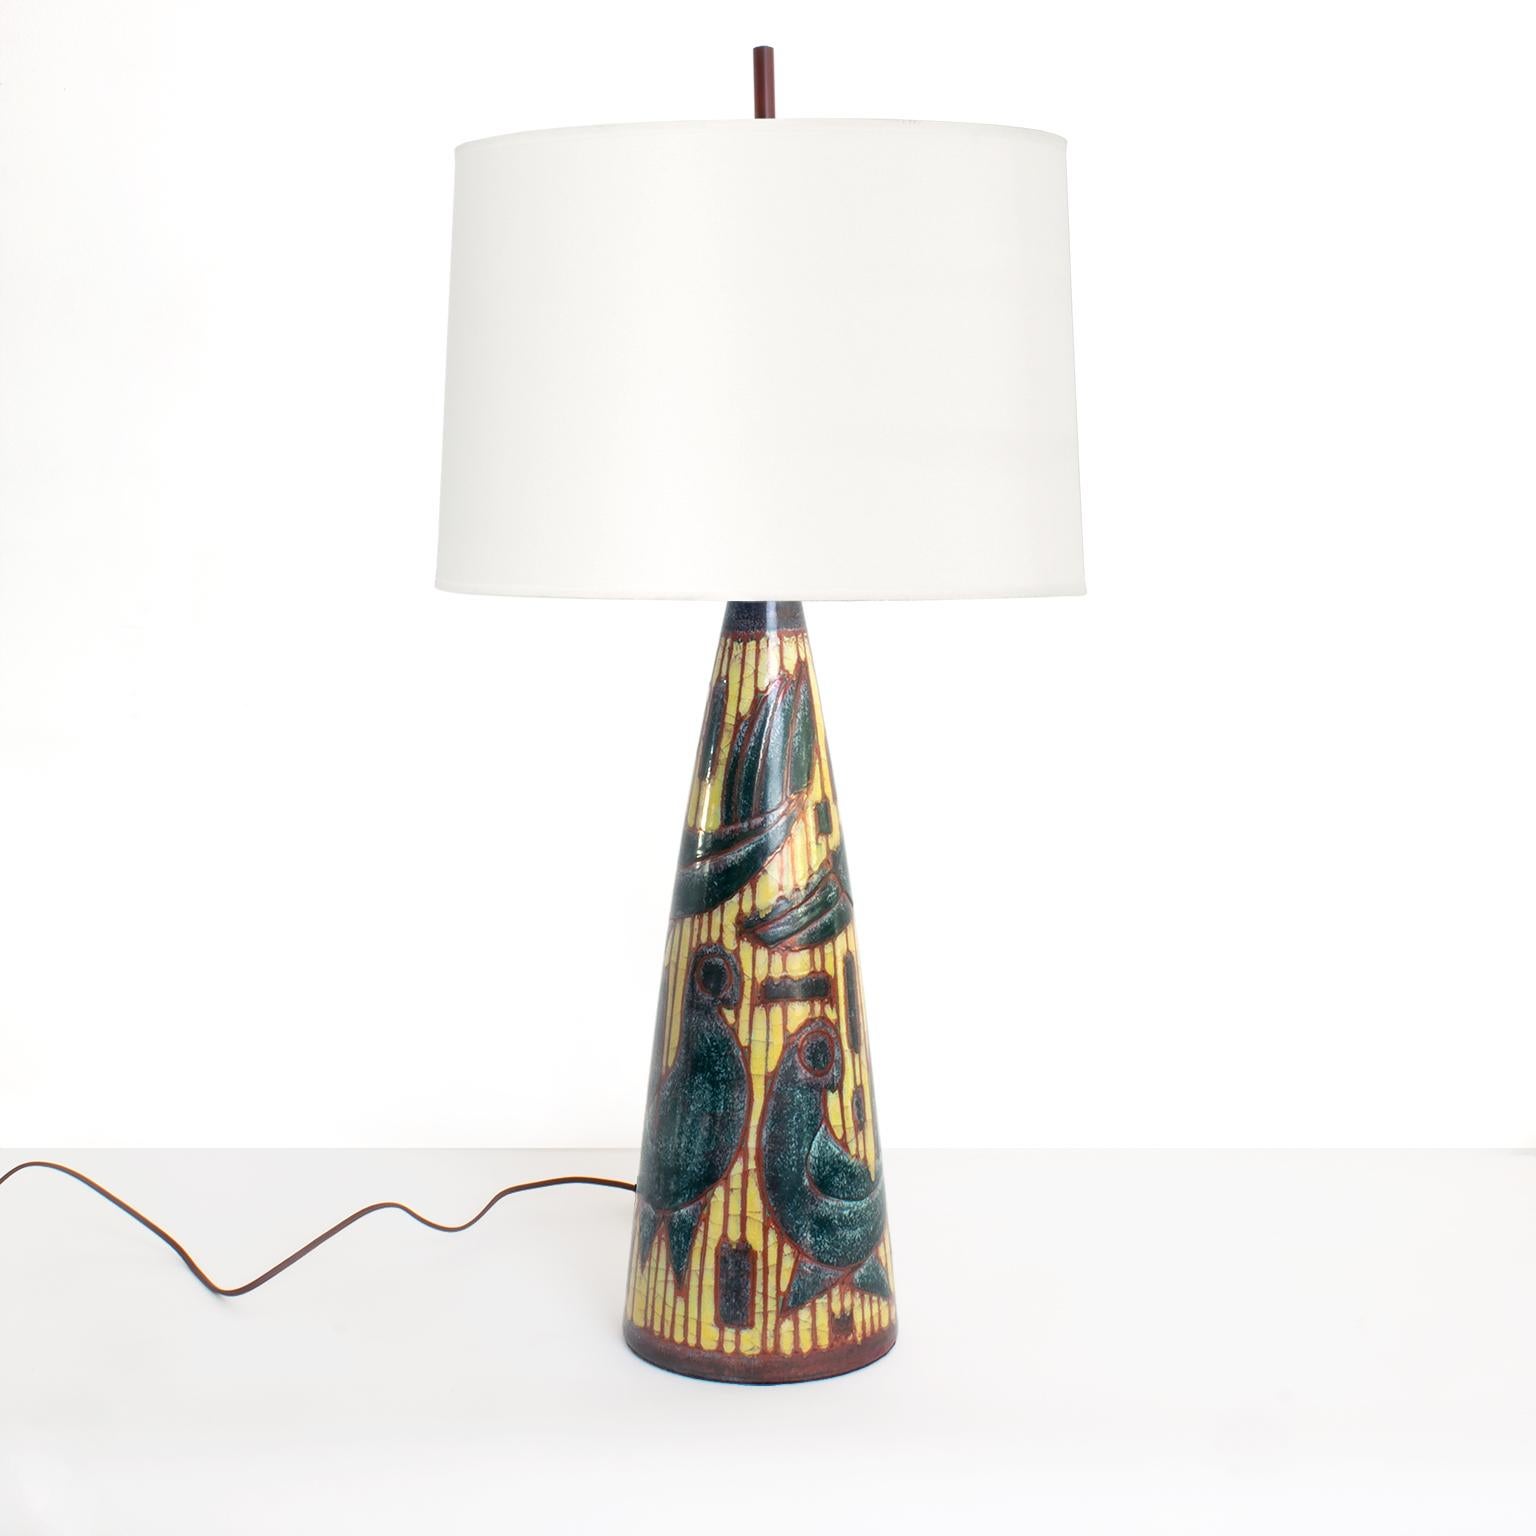 Beautifully hand decorated Scandinavian Modern ceramic lamp designed by Marianne Starck for Michael Andersen, Bornholm, Denmark. The lamp depicts several birds against a golden background perched inside a red cage. The lamp has custom hand patinated